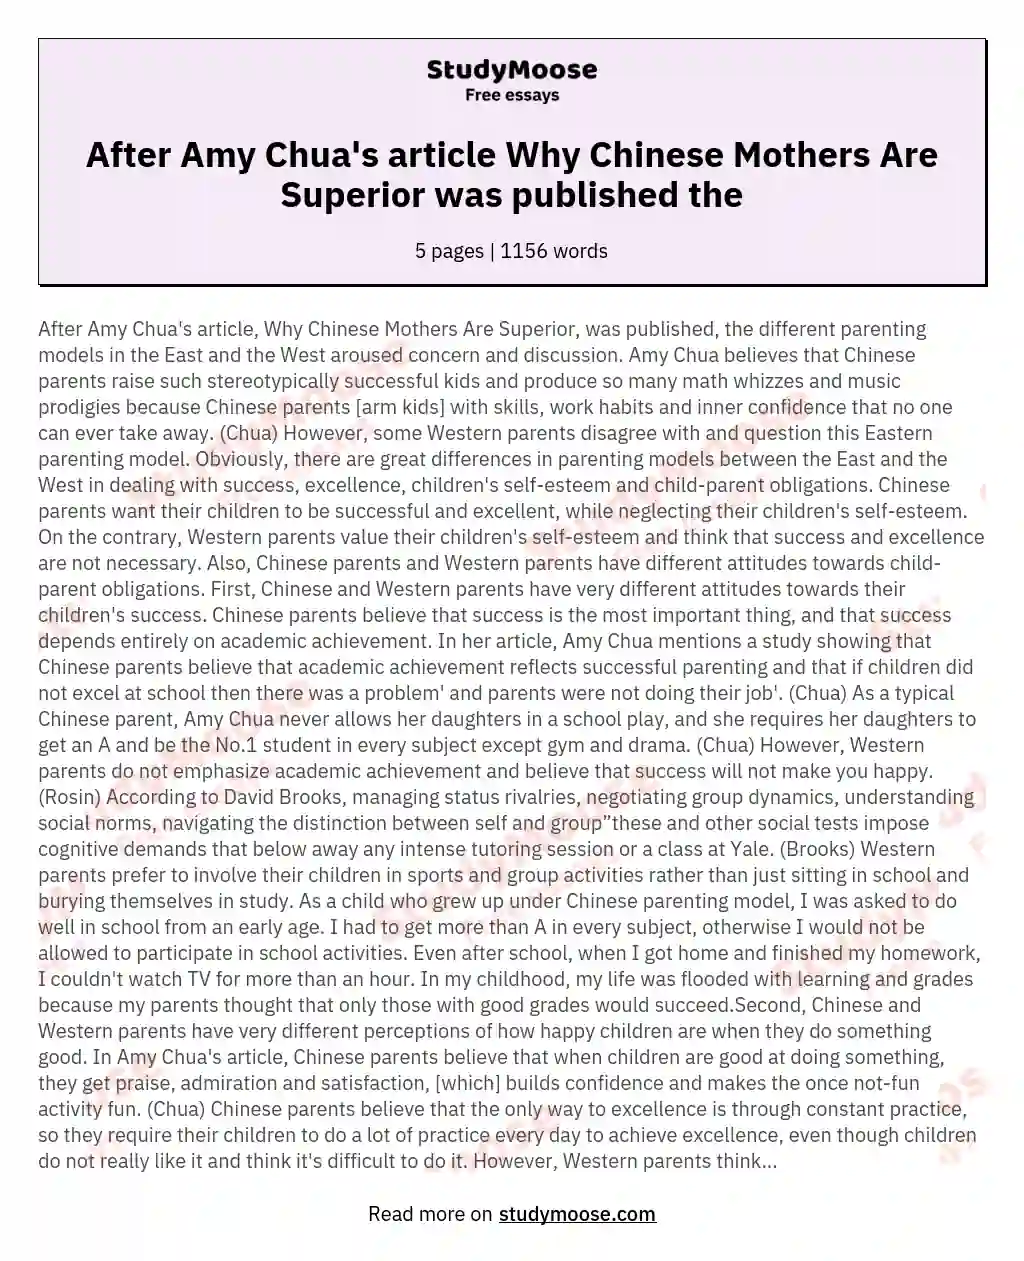 After Amy Chua's article Why Chinese Mothers Are Superior was published the essay